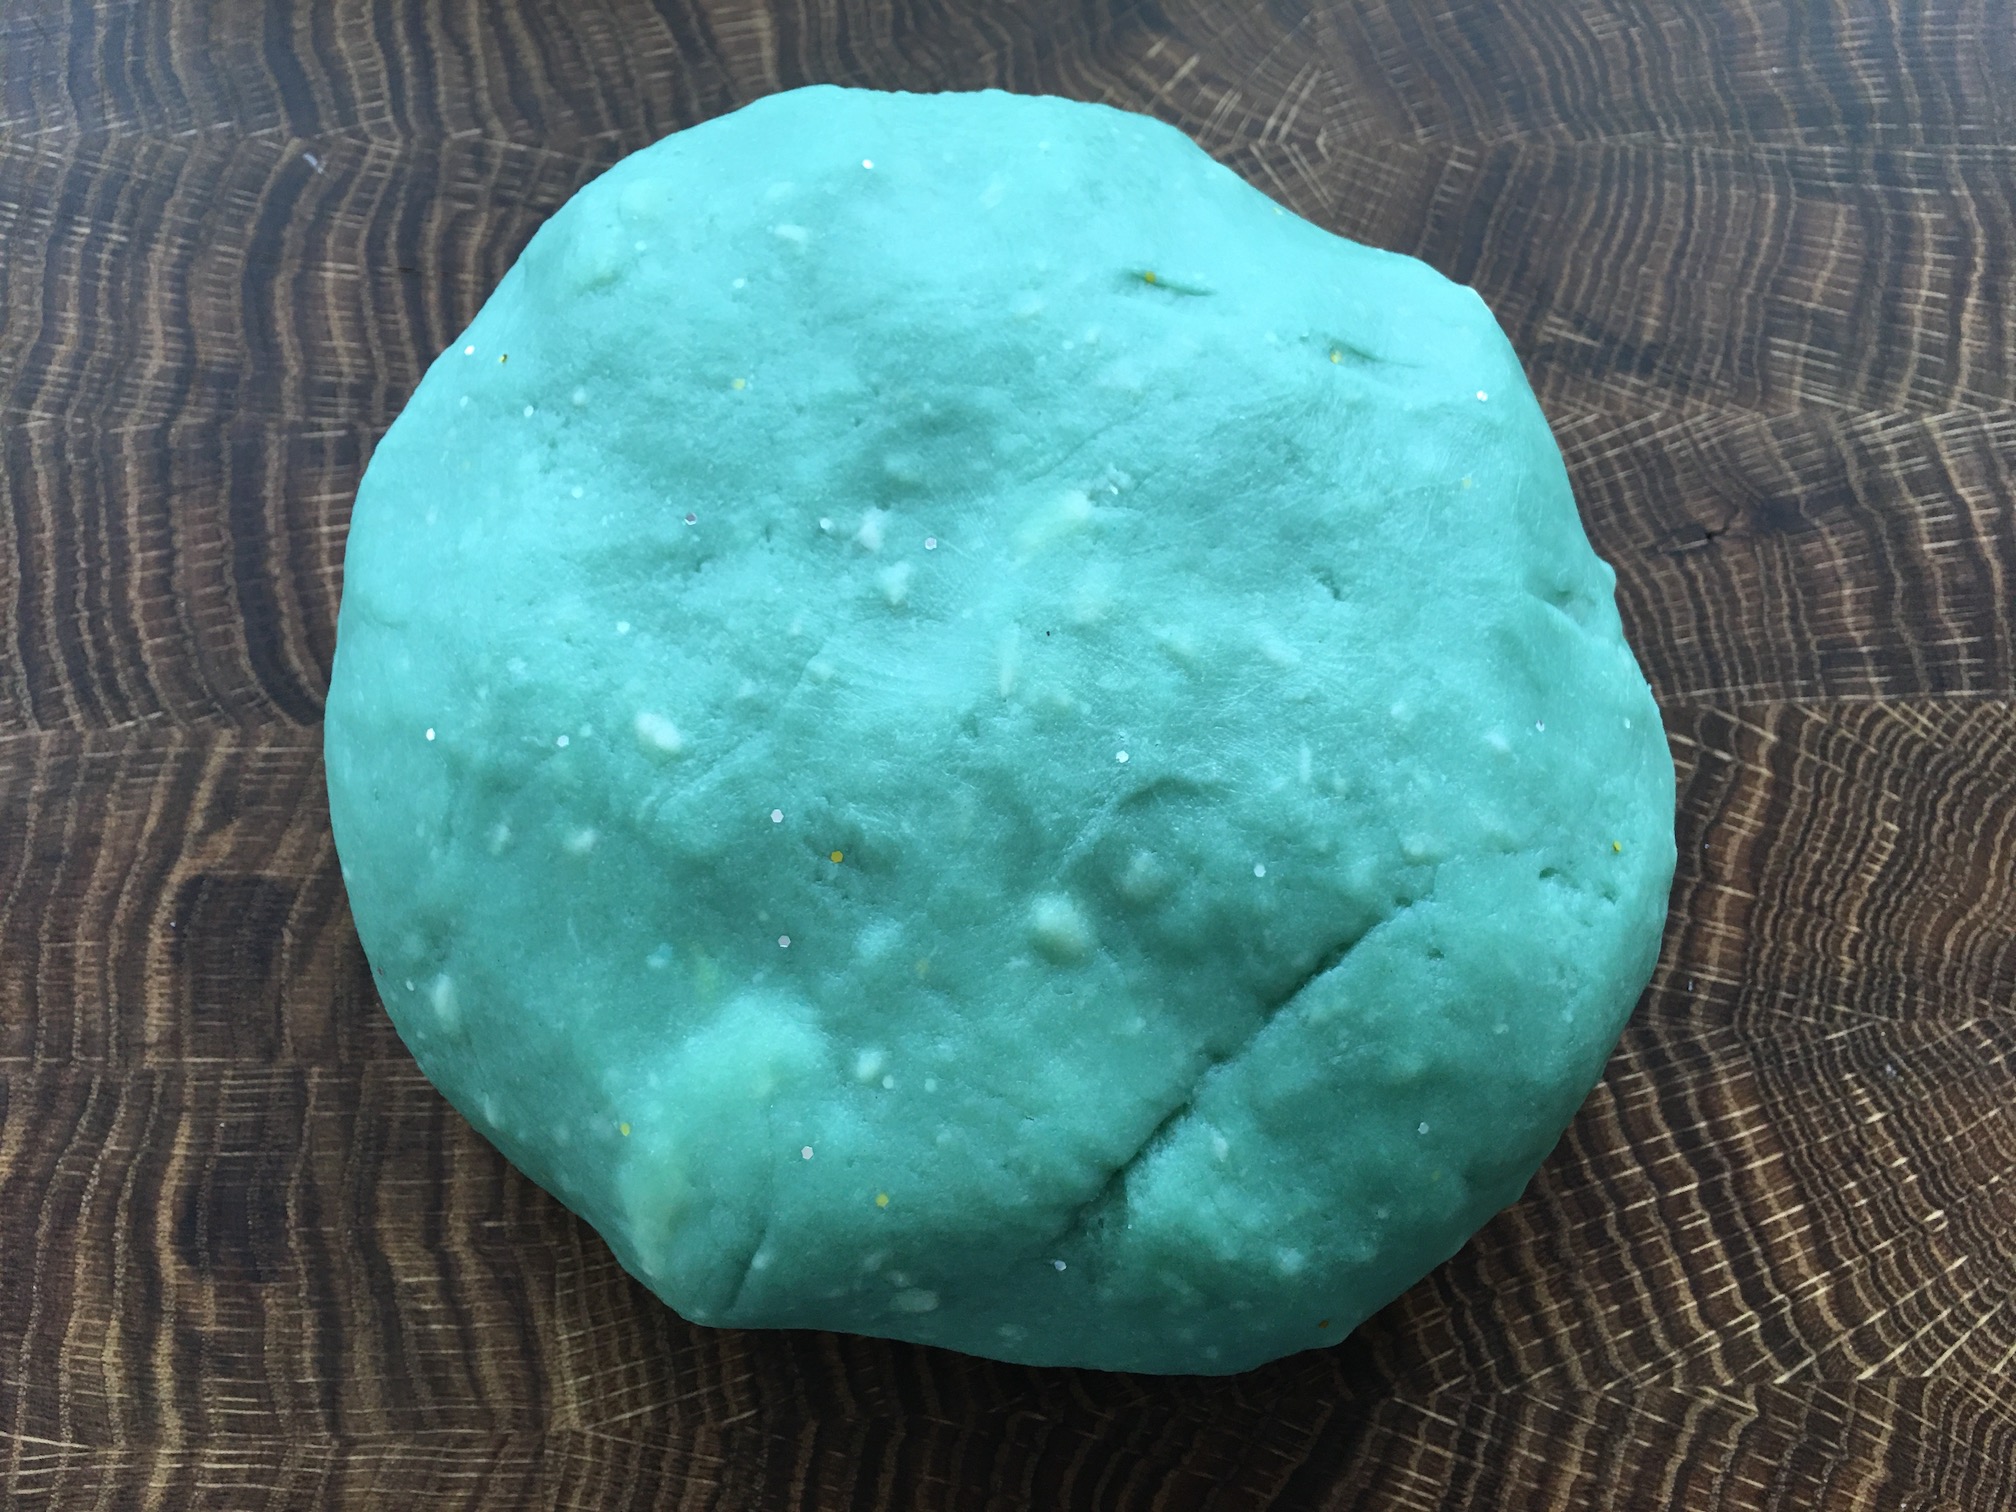 A lumpy turquoise blob of turquoise glitter play dough sits on a wooden board.